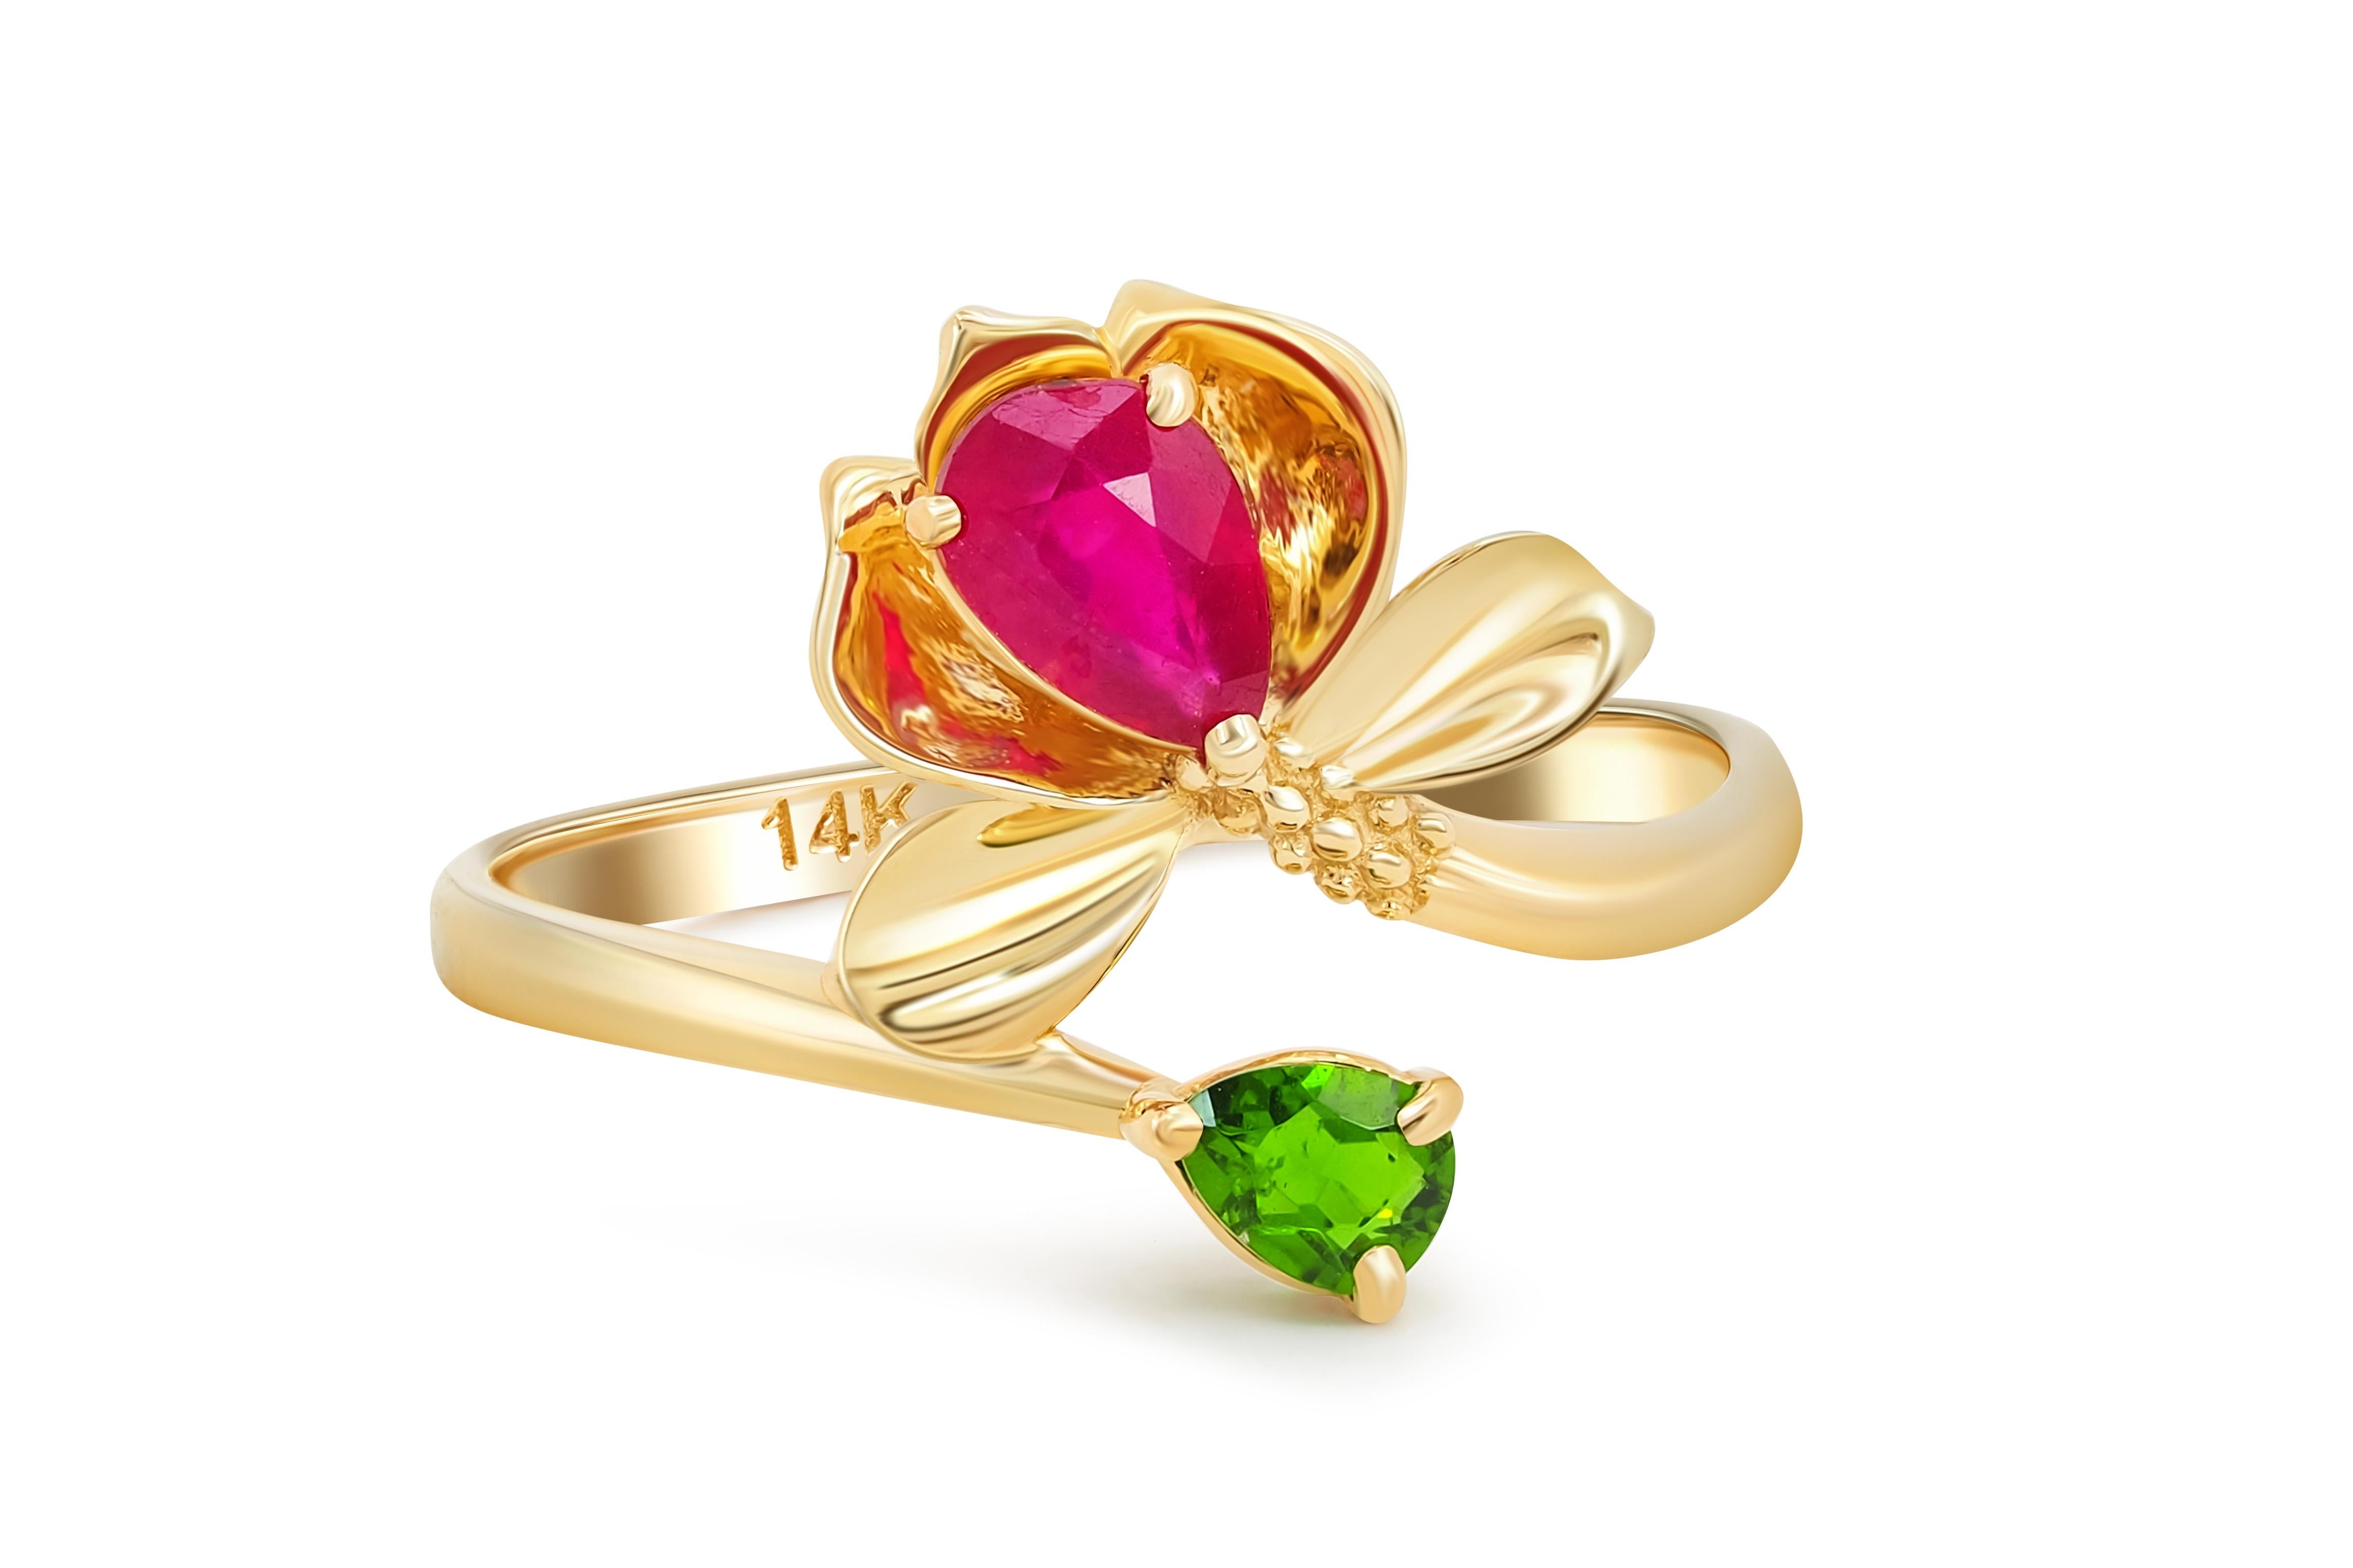 Water lily ruby ring. 
Pear ruby 14k gold ring. Lily ruby ring. Statement ruby ring. July birthstone ring. Gold flower ring. Open ended ring.

Metal: 14k gold
Weight: 2.0 g. depends from size.

Set with ruby, color - red
Pear cut, 0.75 ct. in total,